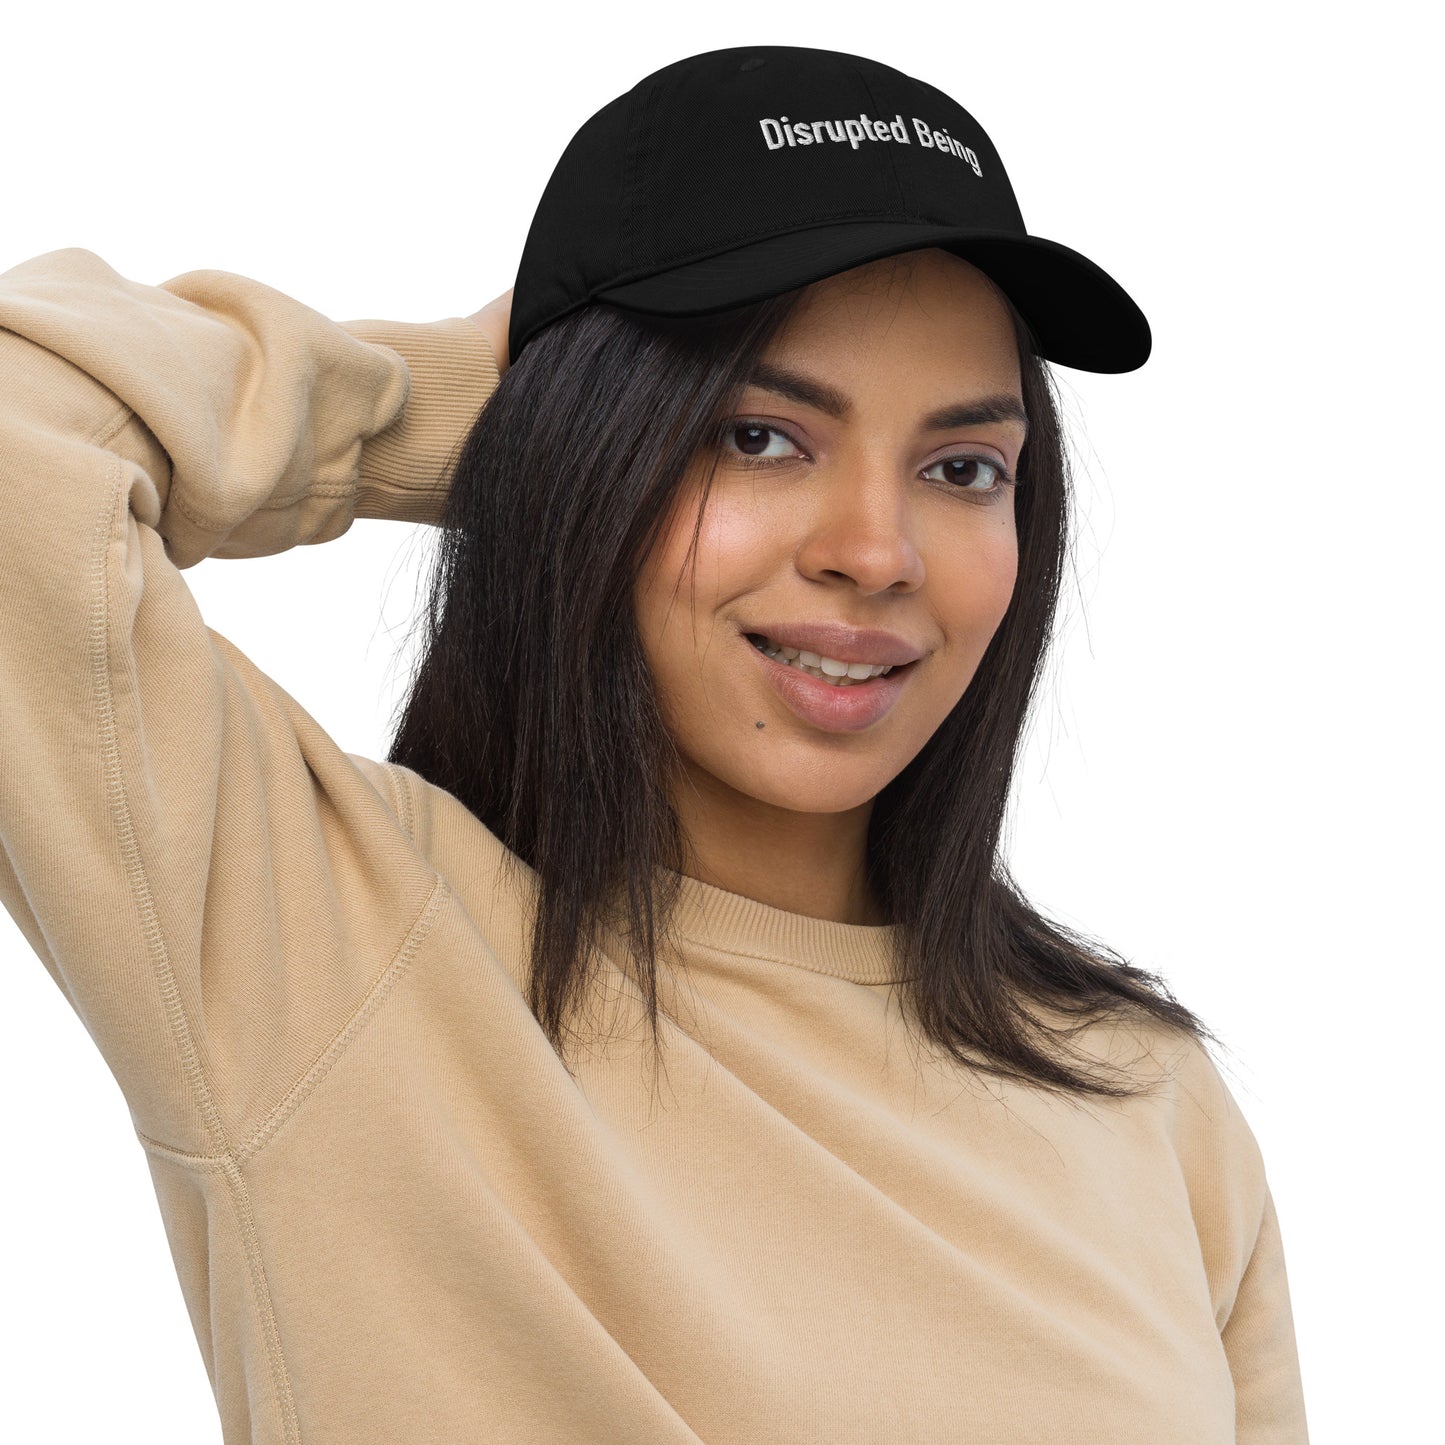 Disrupted Being, official logo (embroidery), Organic dad hat